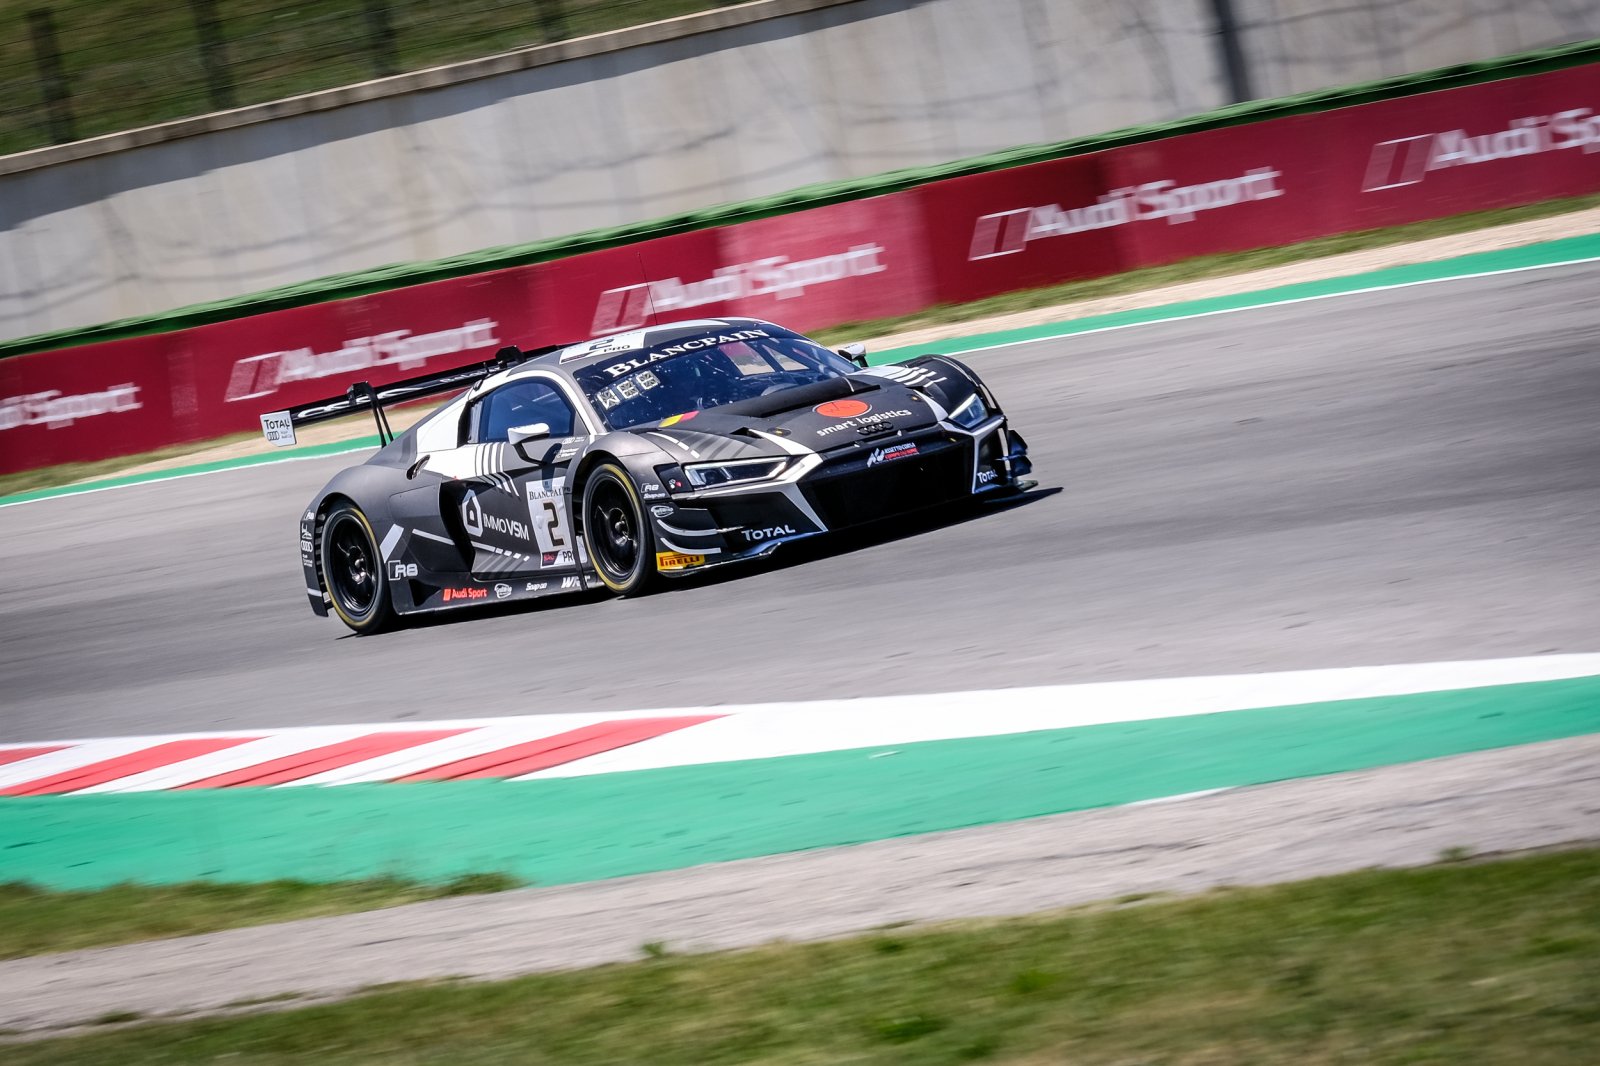 Weerts and Vanthoor clinch victory in second Misano contest as Belgian Audi Club Team WRT returns to the top step